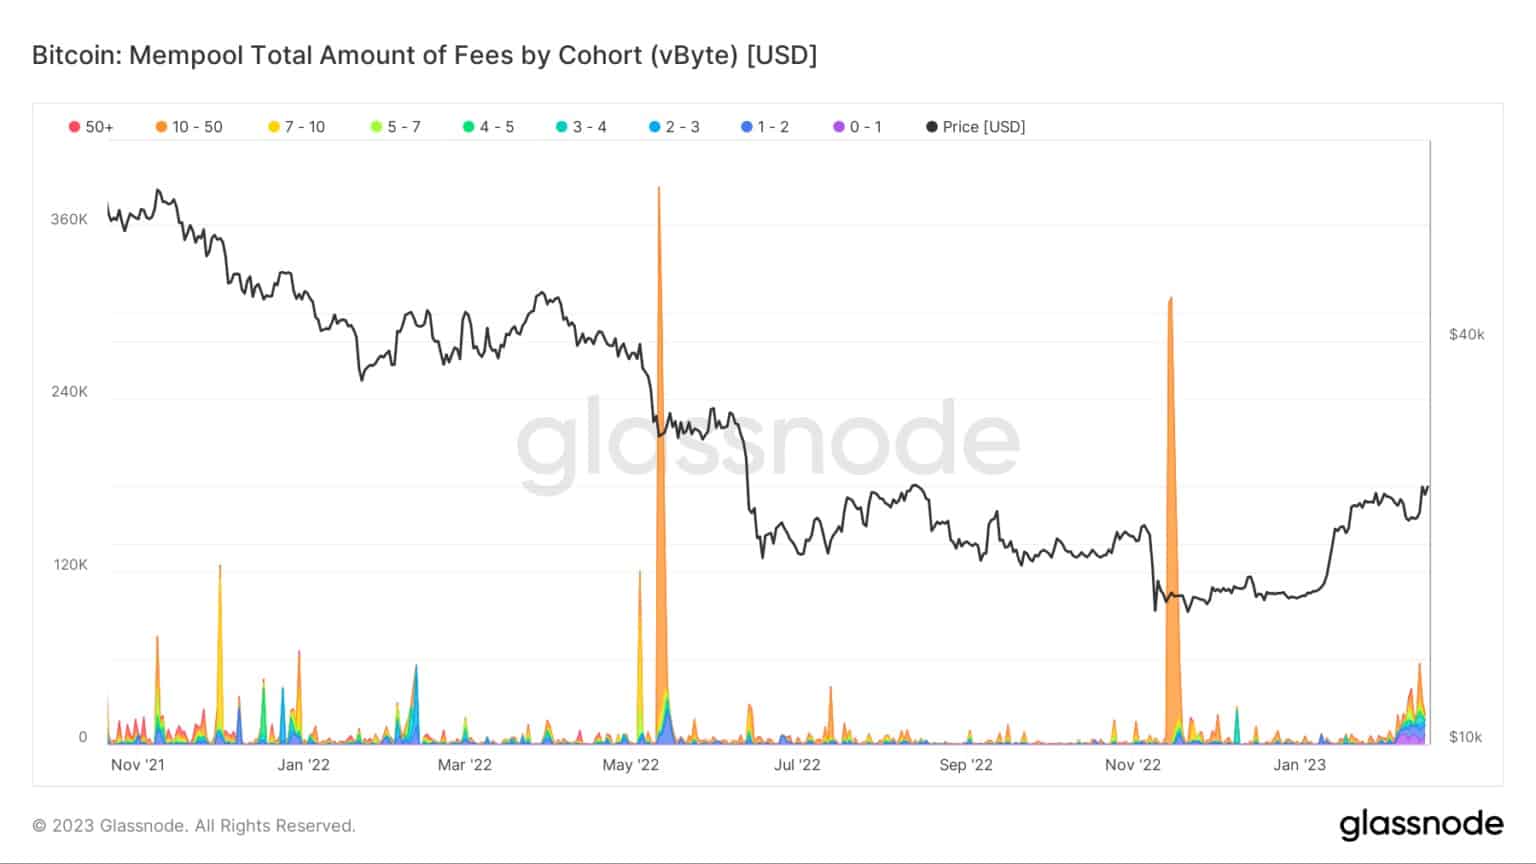 Bitcoin: Mempool total amount of fees by cohort (Source: Glassnode)